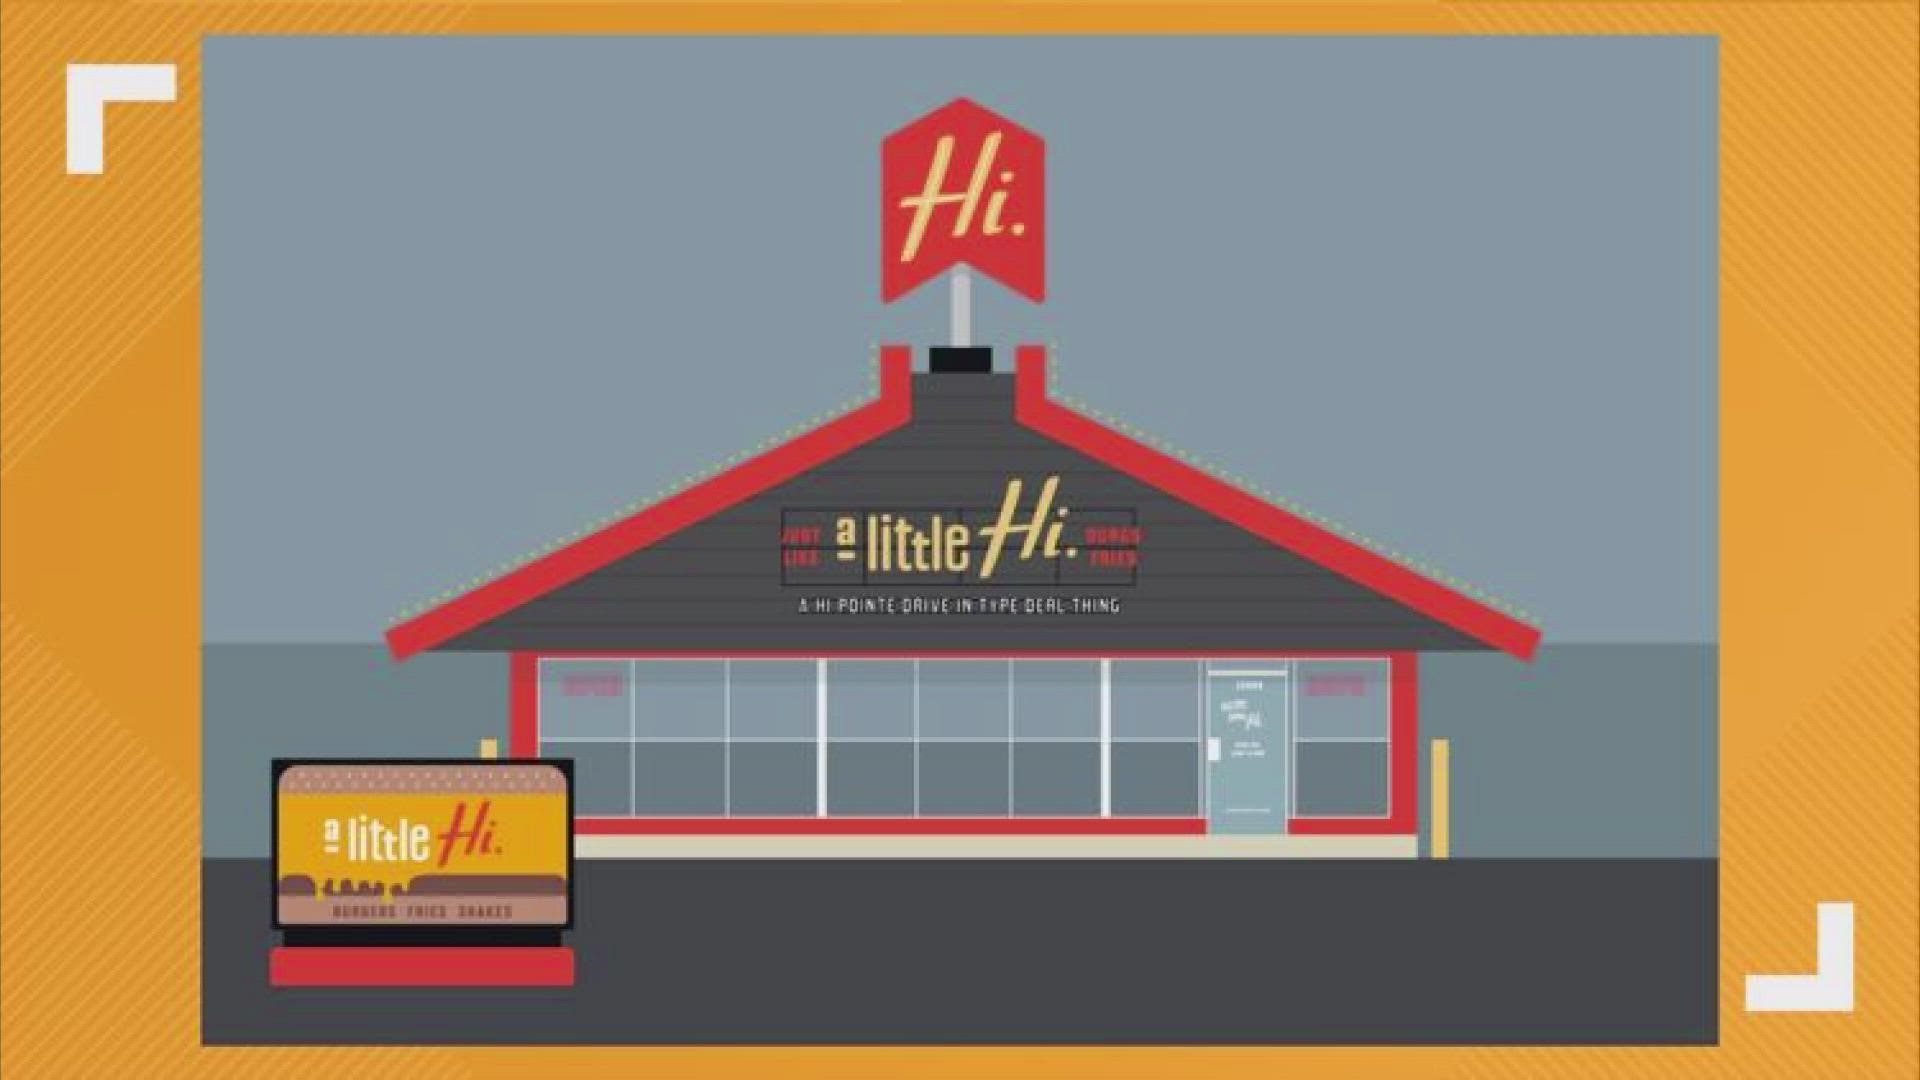 A Little Hi will be a mini version of the popular Hi-Pointe Drive-In, slimming down the size and menu. It is set to open in the fall.